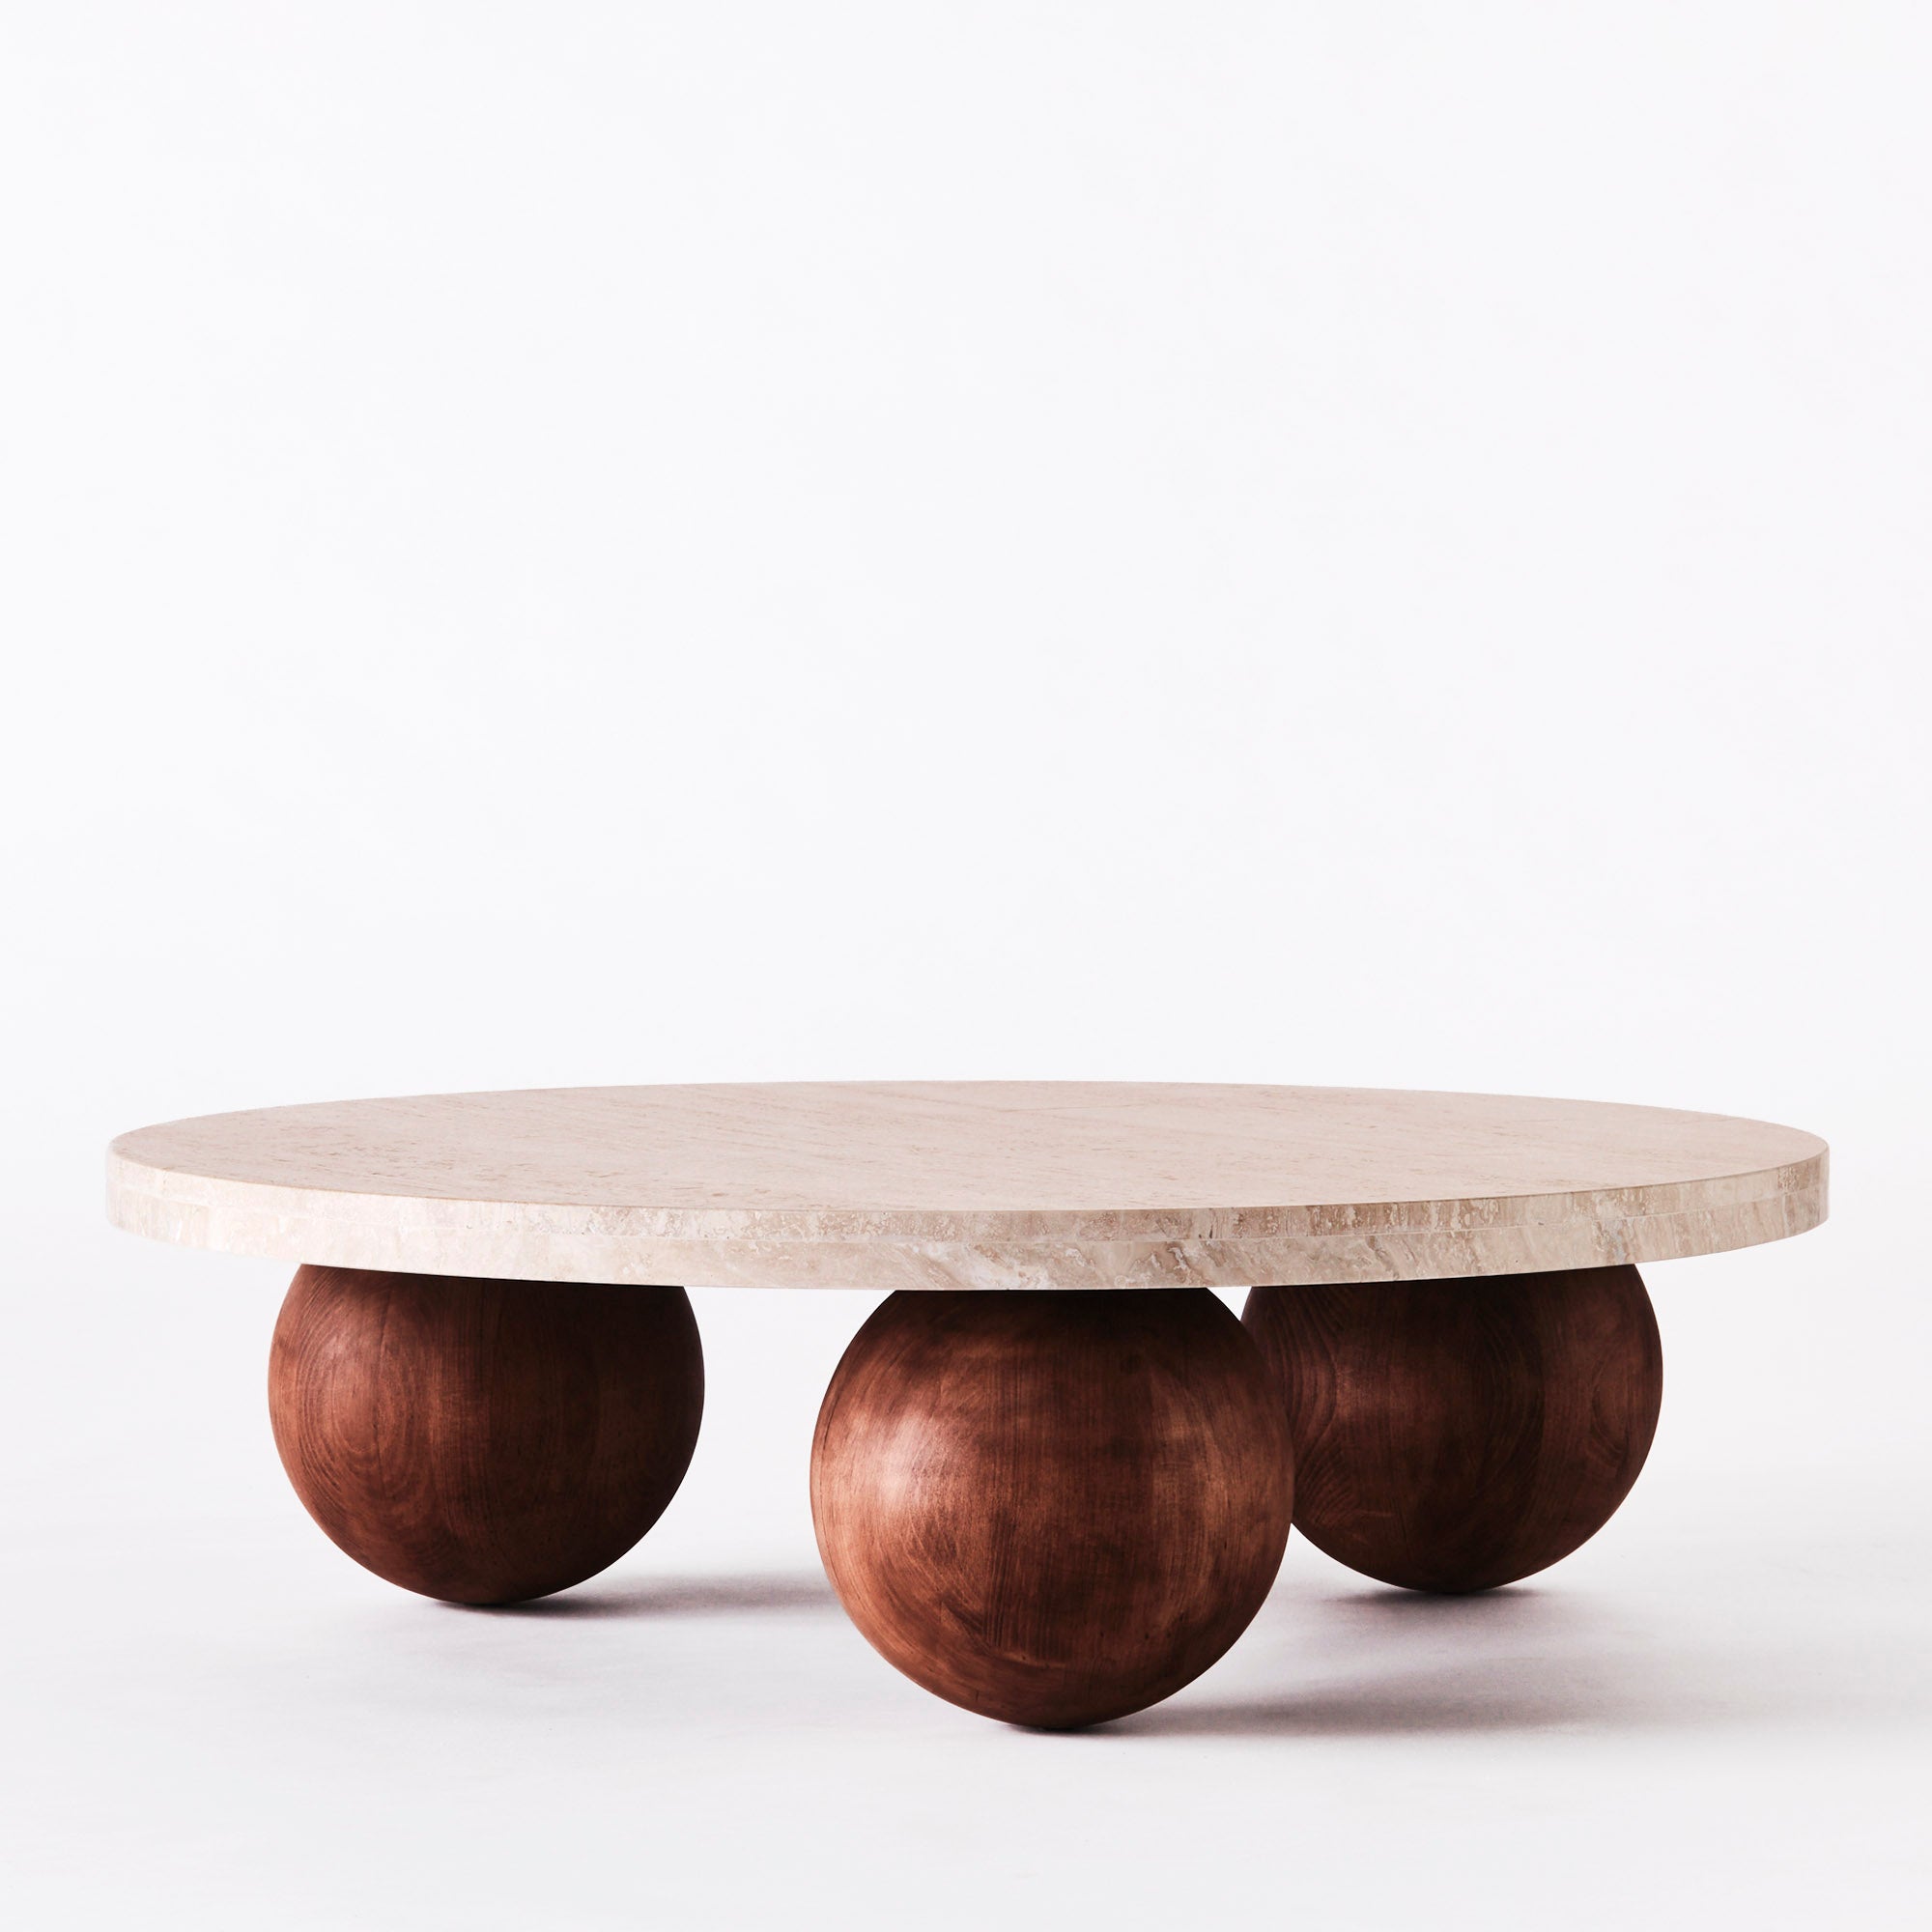 OUTGOING Sphere Round Sofa Table Travertine